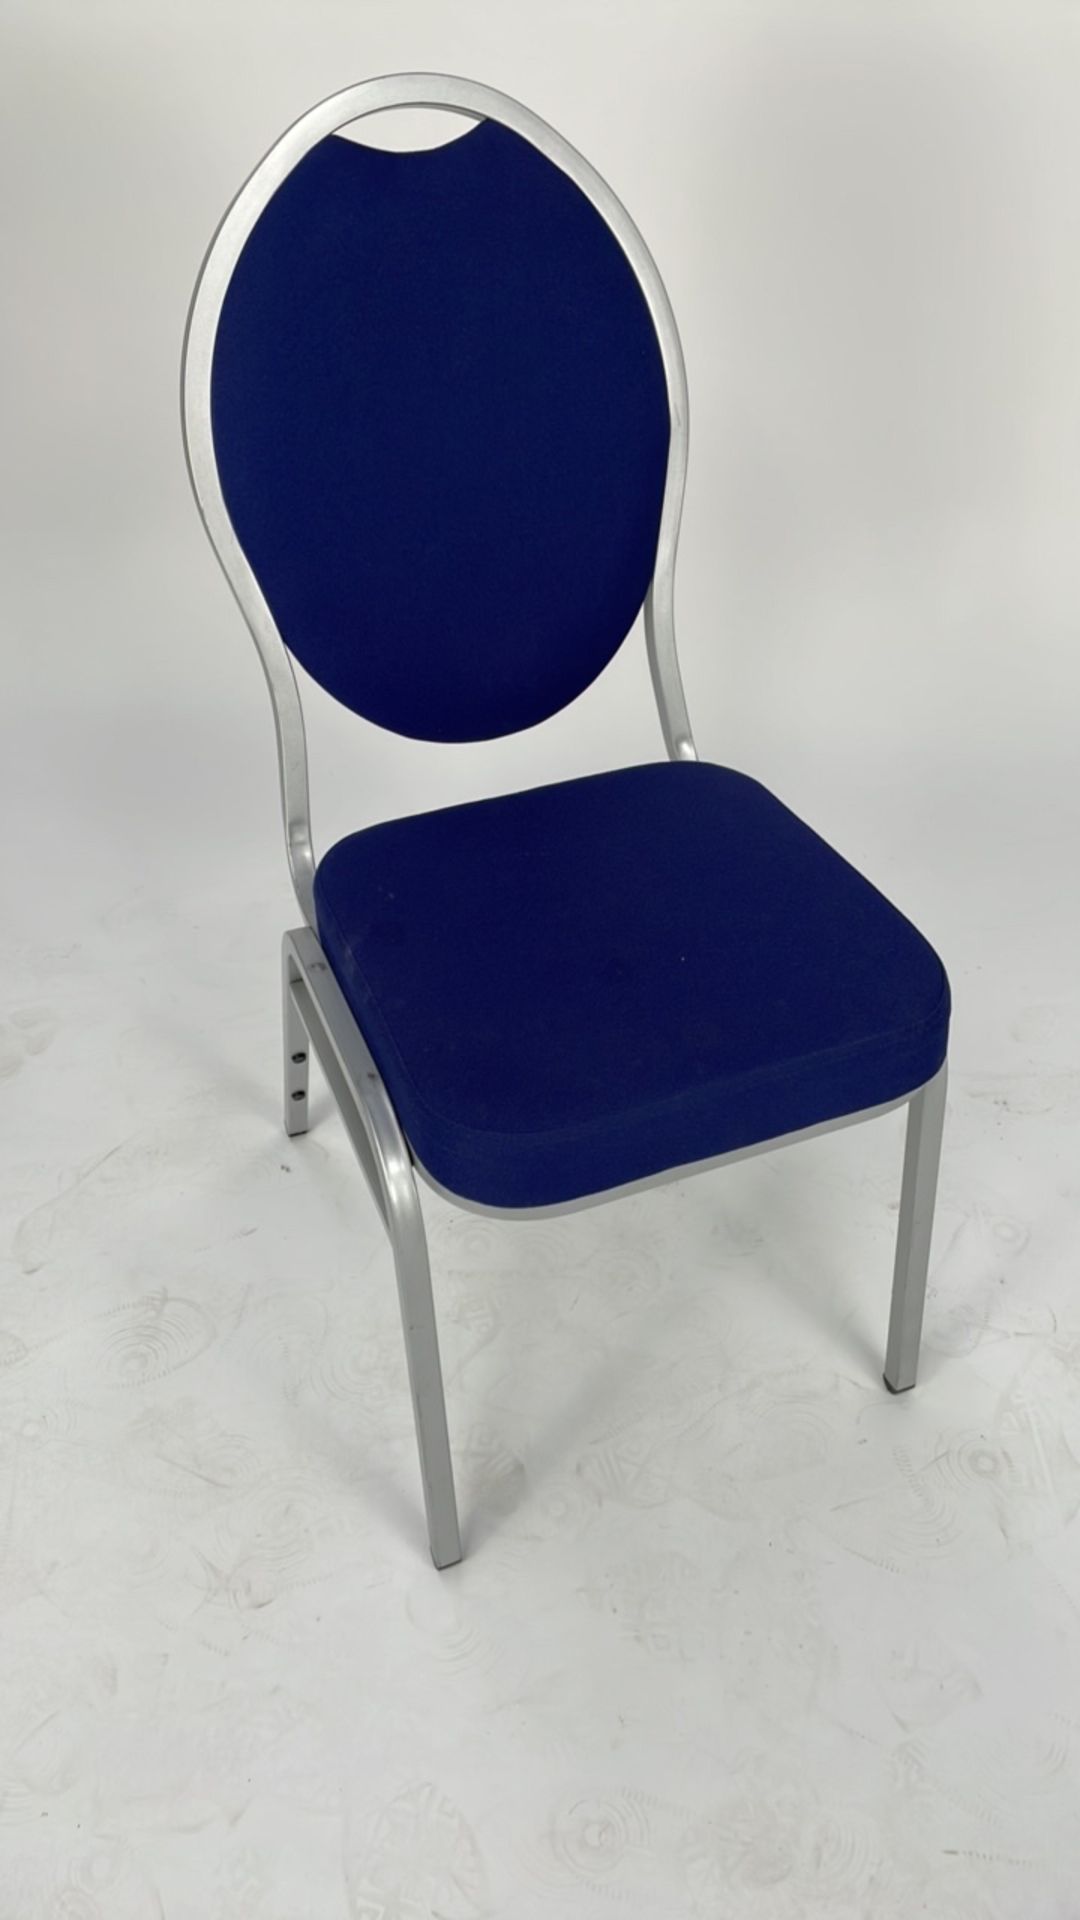 Dining chair blue - Image 3 of 3